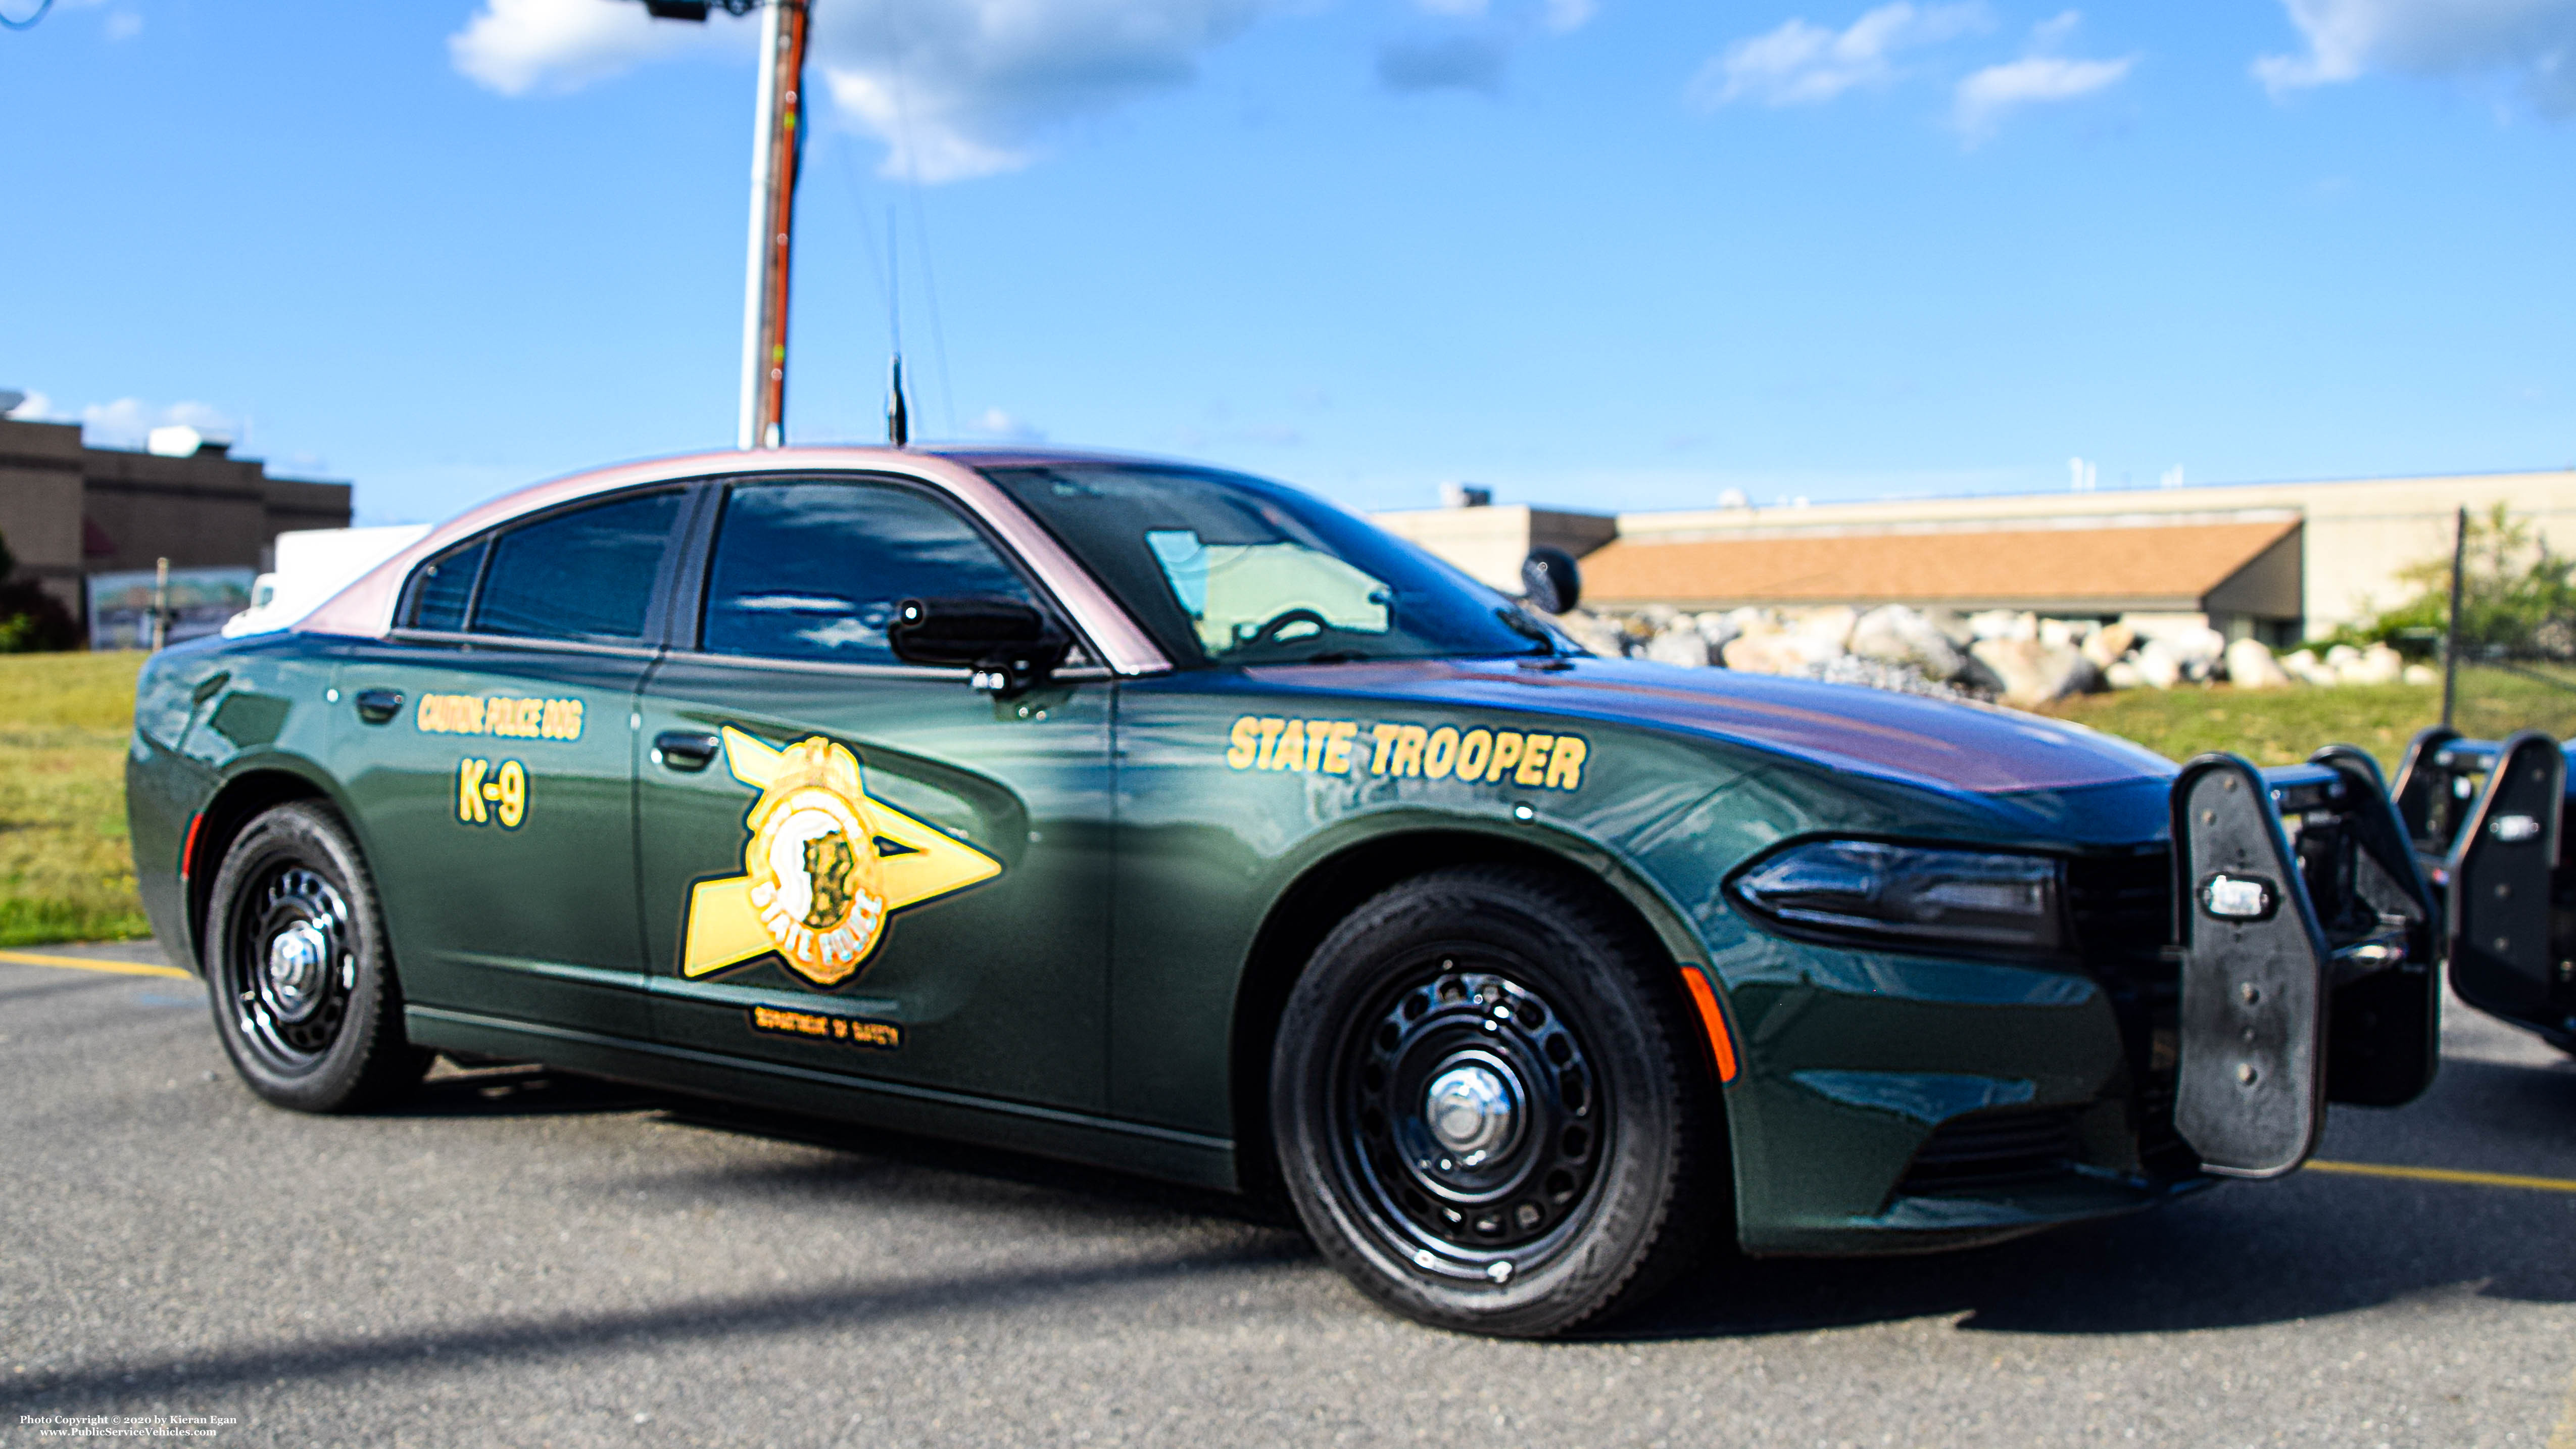 A photo  of New Hampshire State Police
            Cruiser 139, a 2019 Dodge Charger             taken by Kieran Egan